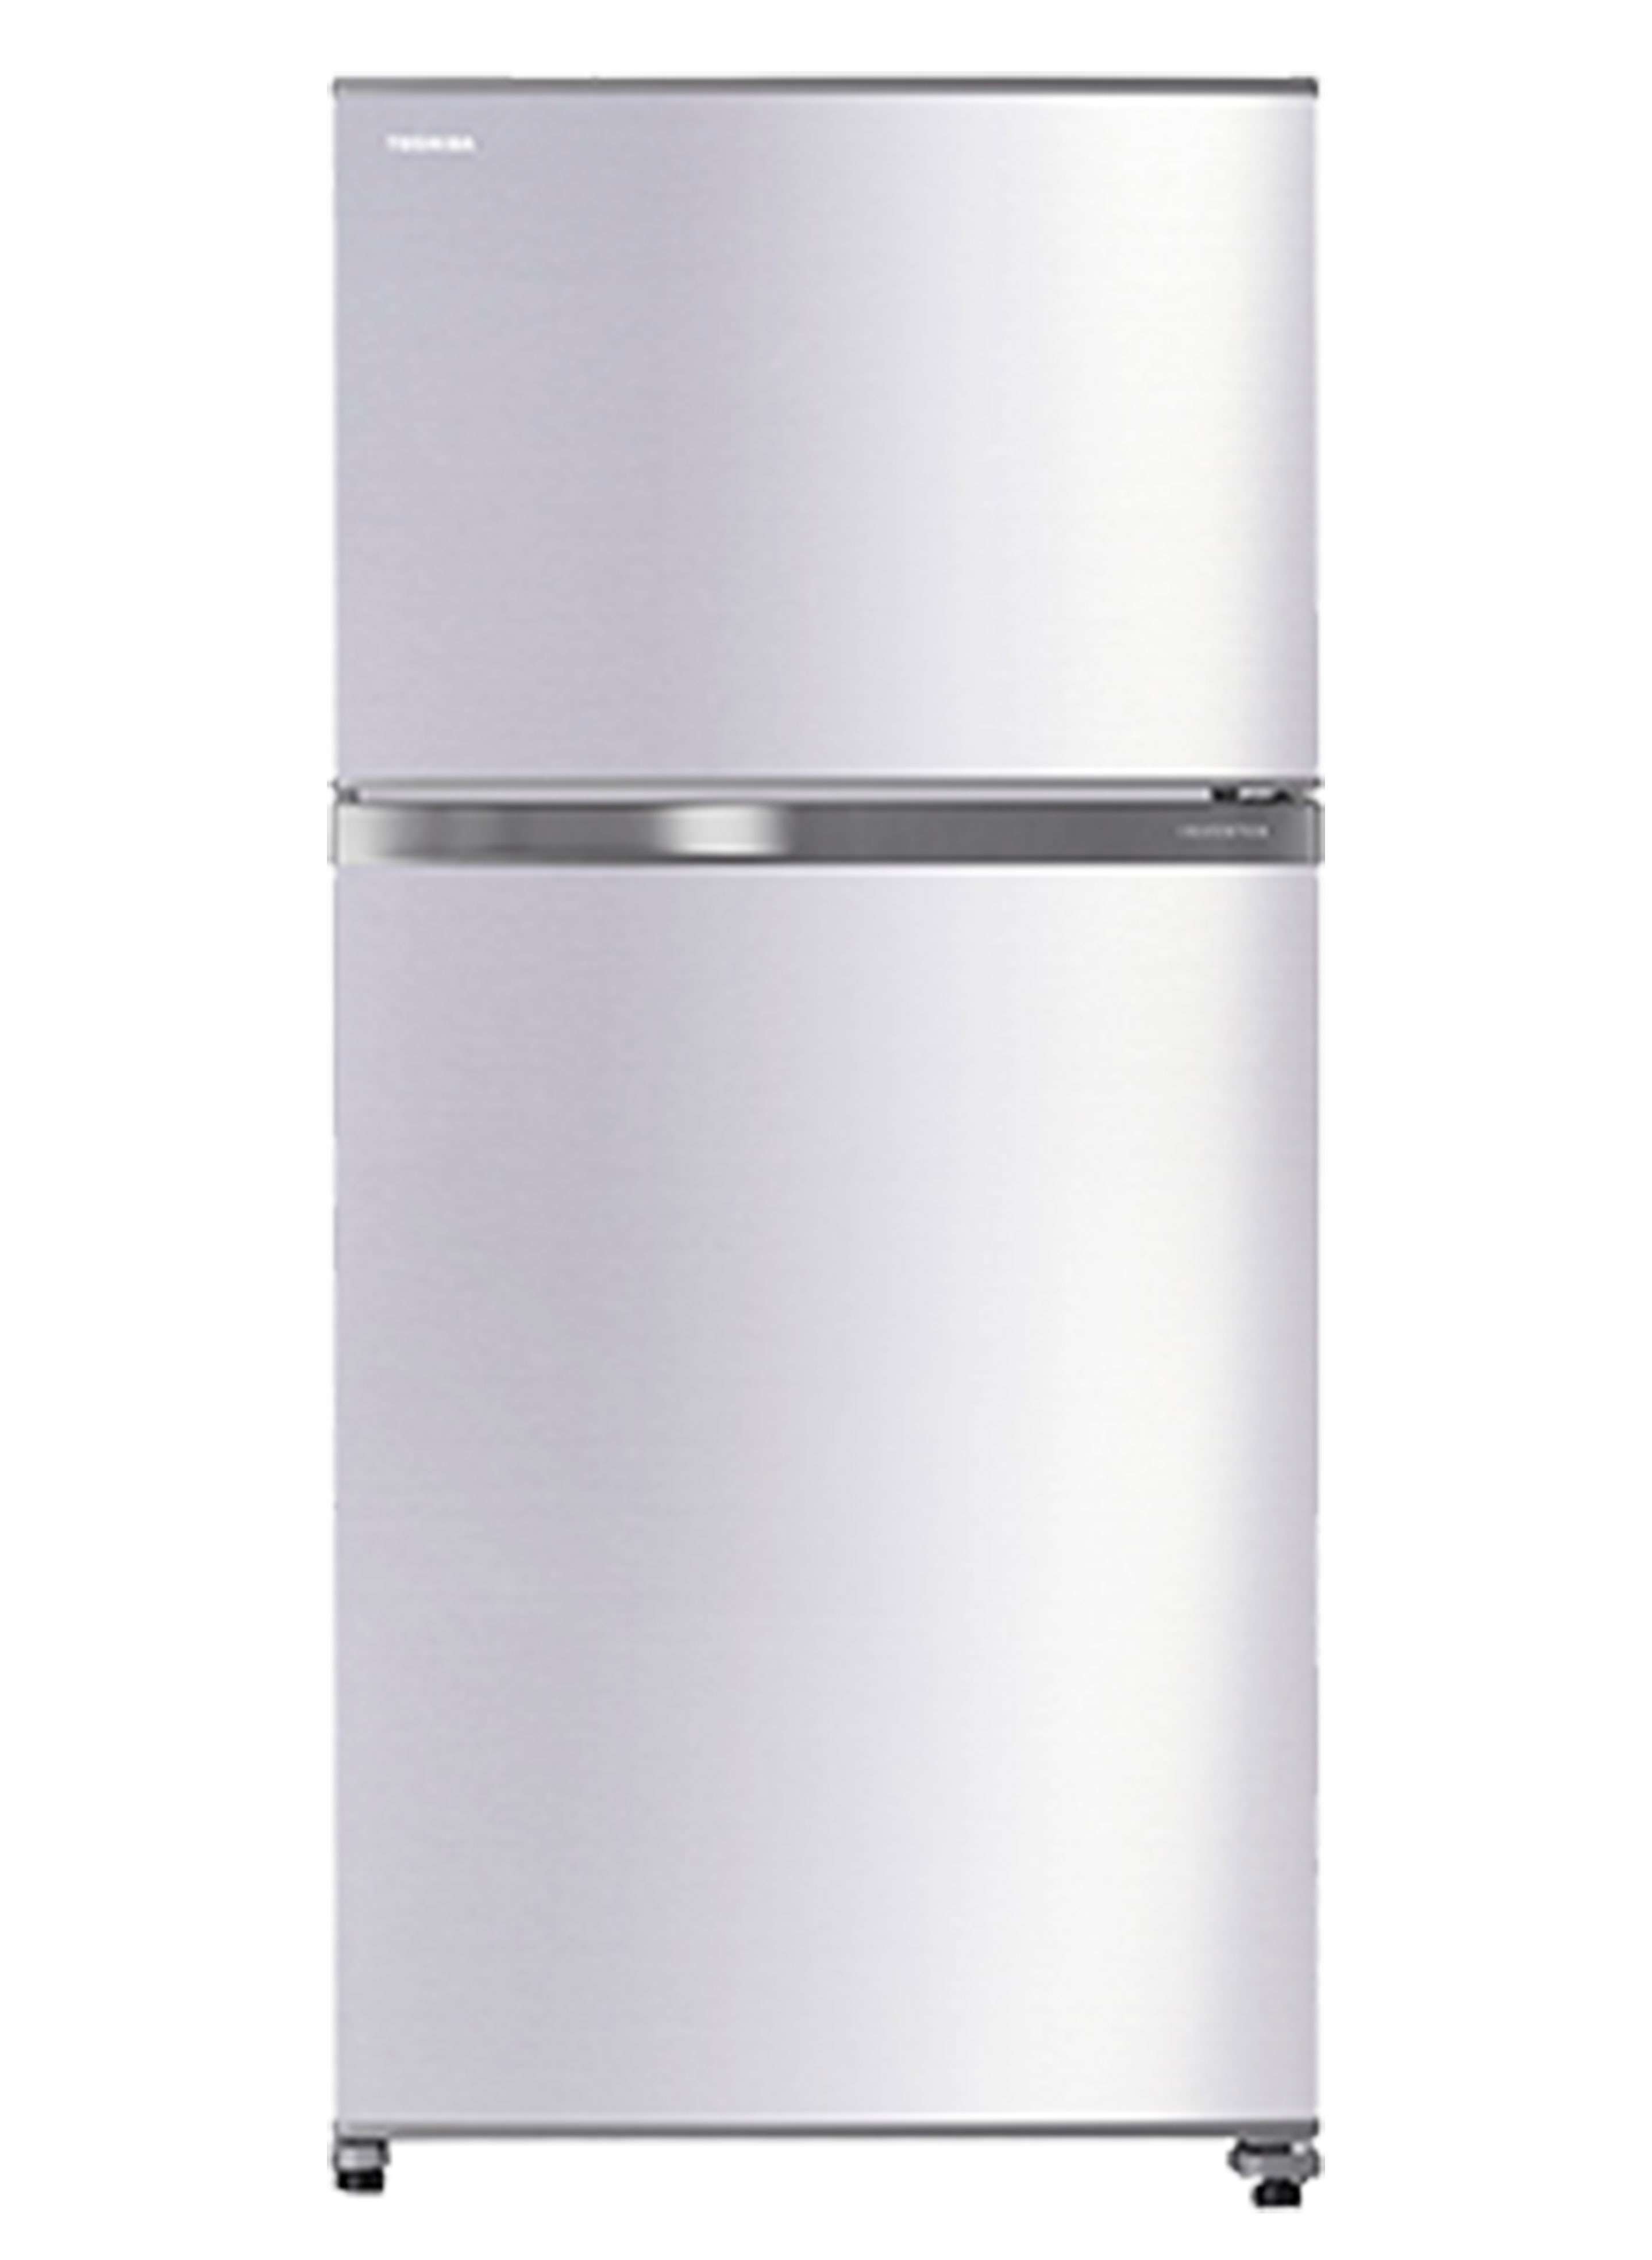 21.8 CU FT Refrigerator | Toshiba Middle East